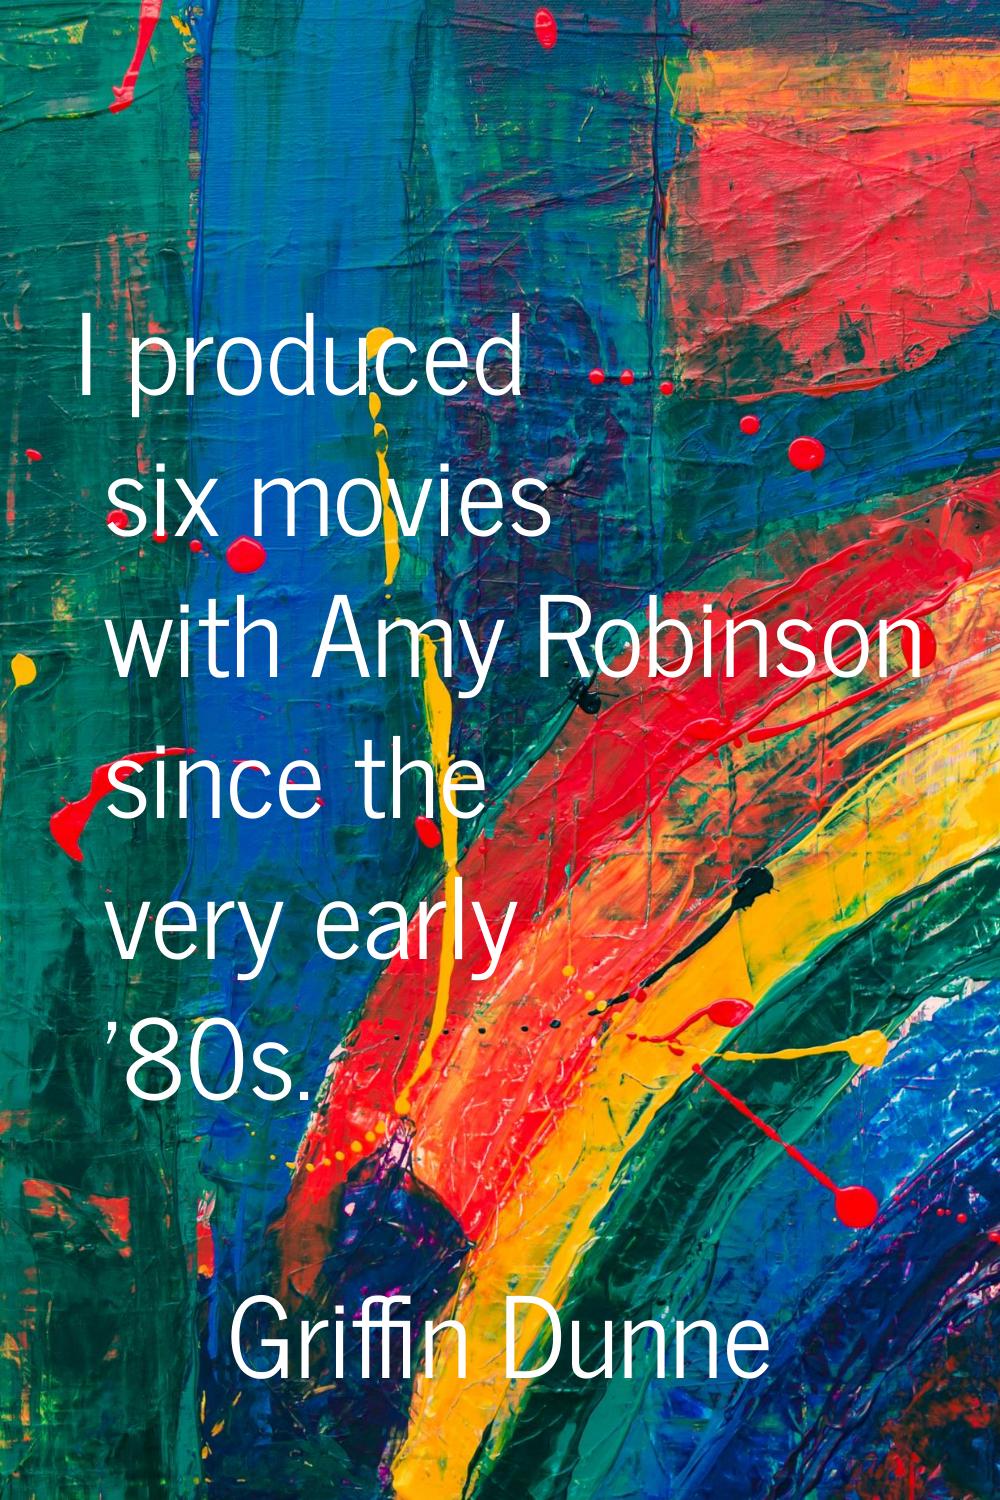 I produced six movies with Amy Robinson since the very early '80s.